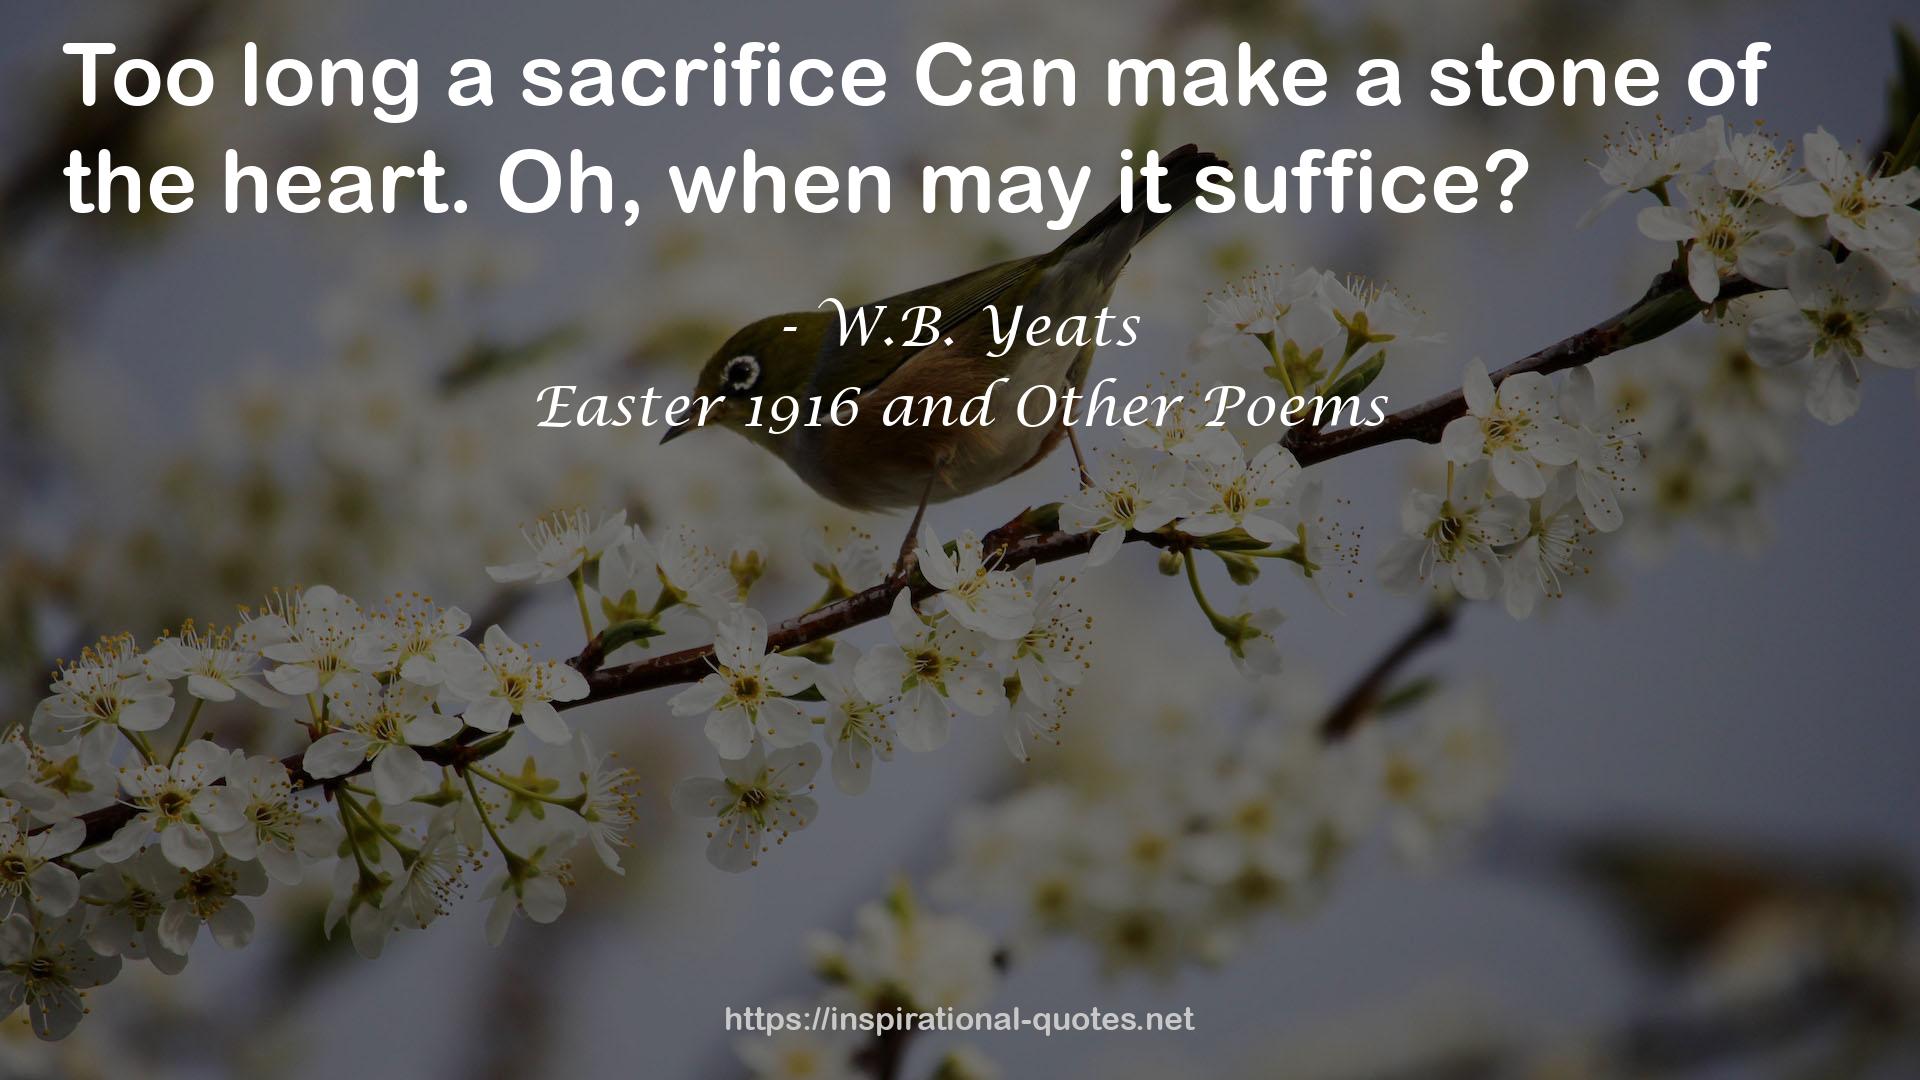 Easter 1916 and Other Poems QUOTES